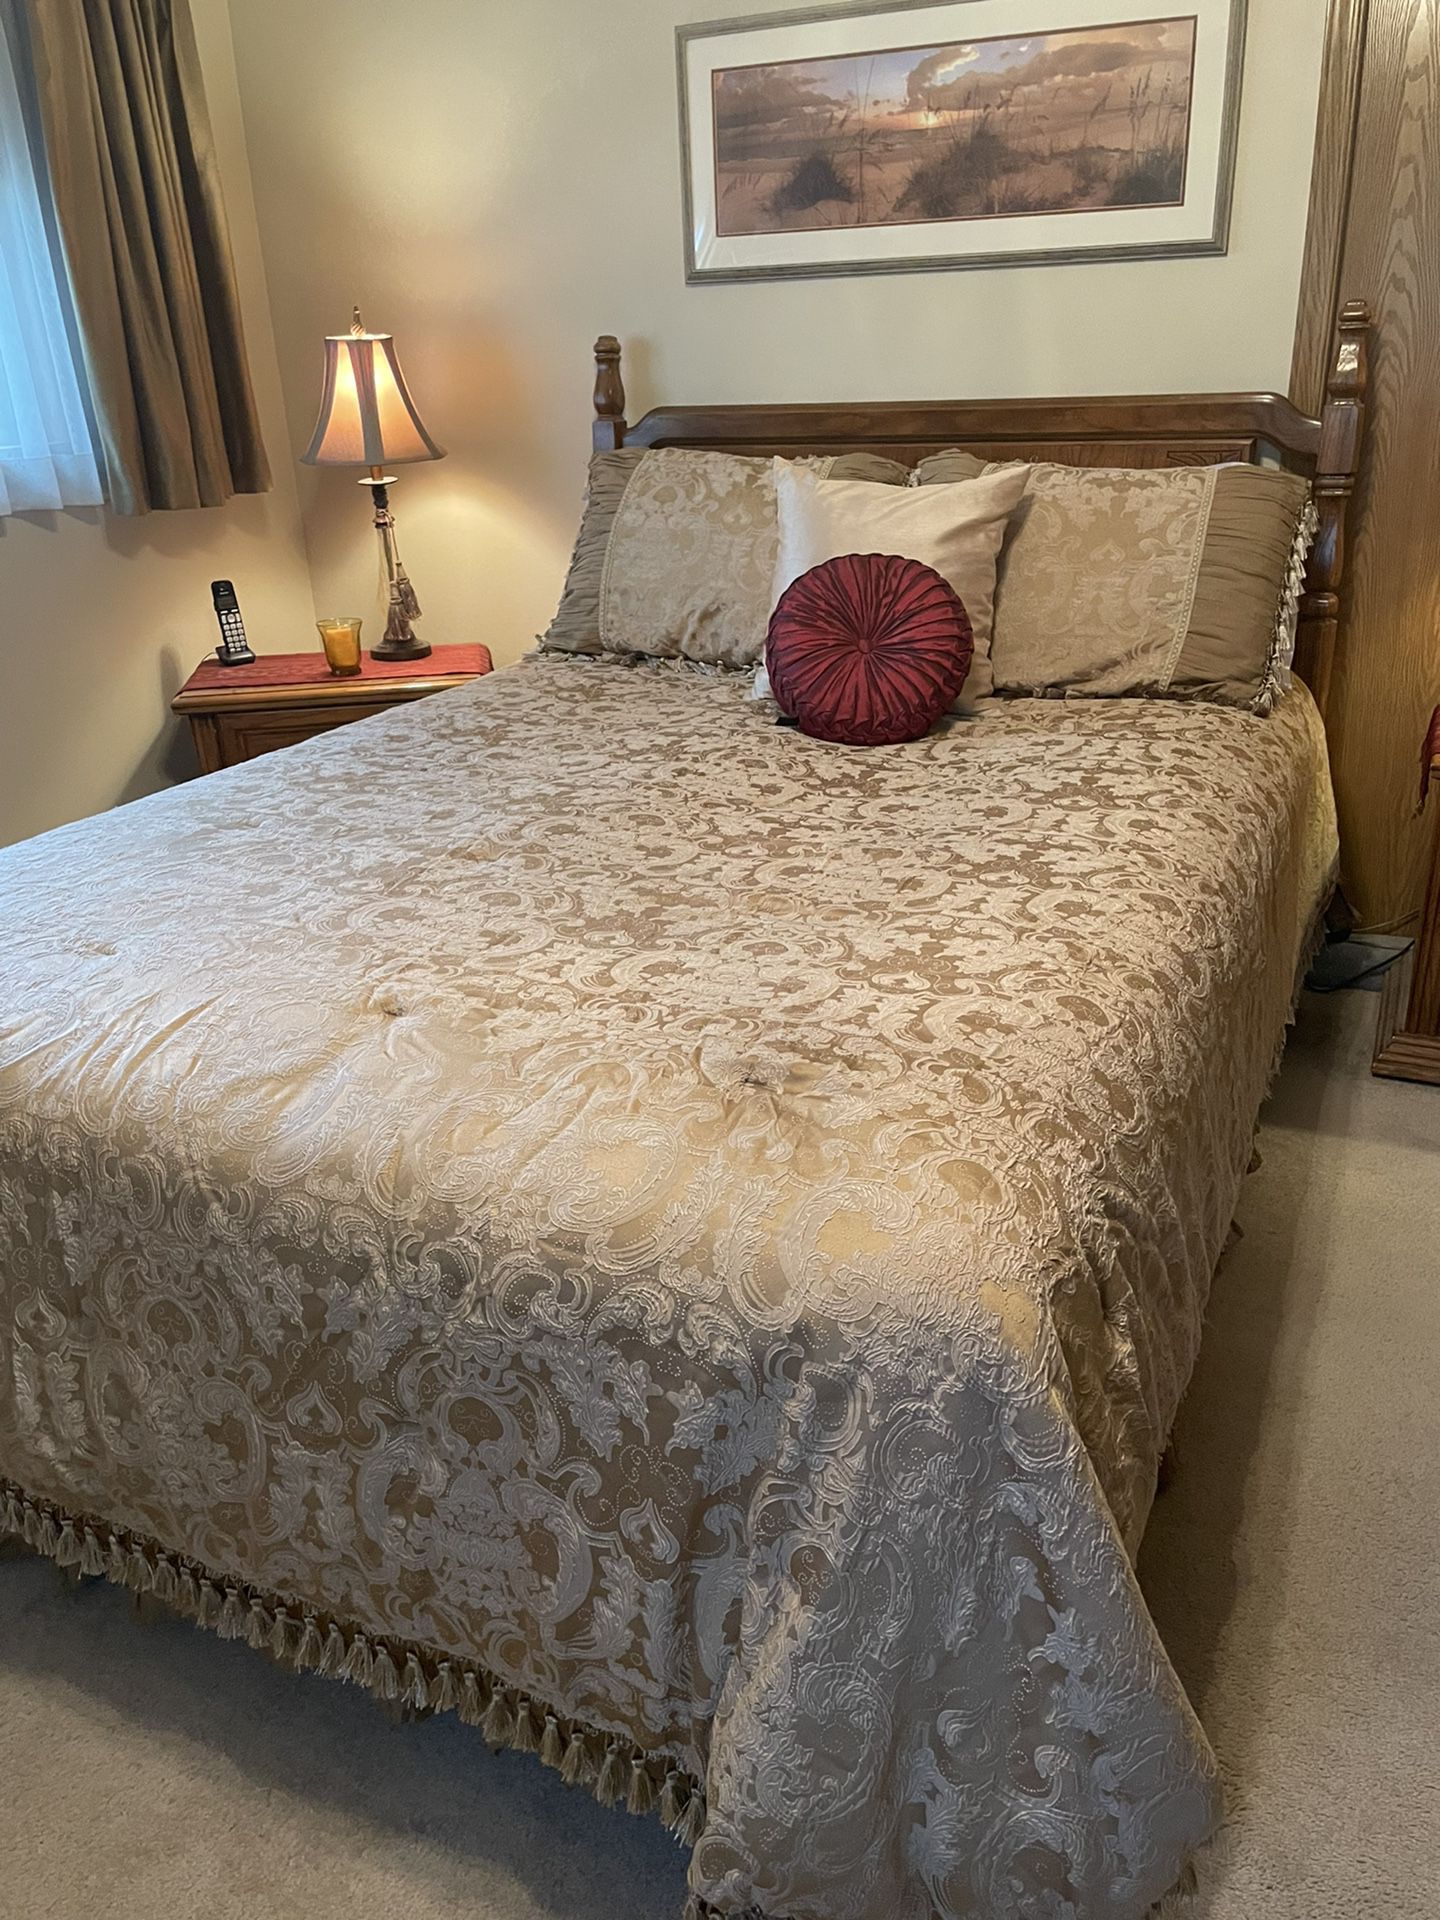 Queen Gold Bedspread With Shams, Skirt And Decor Pillows